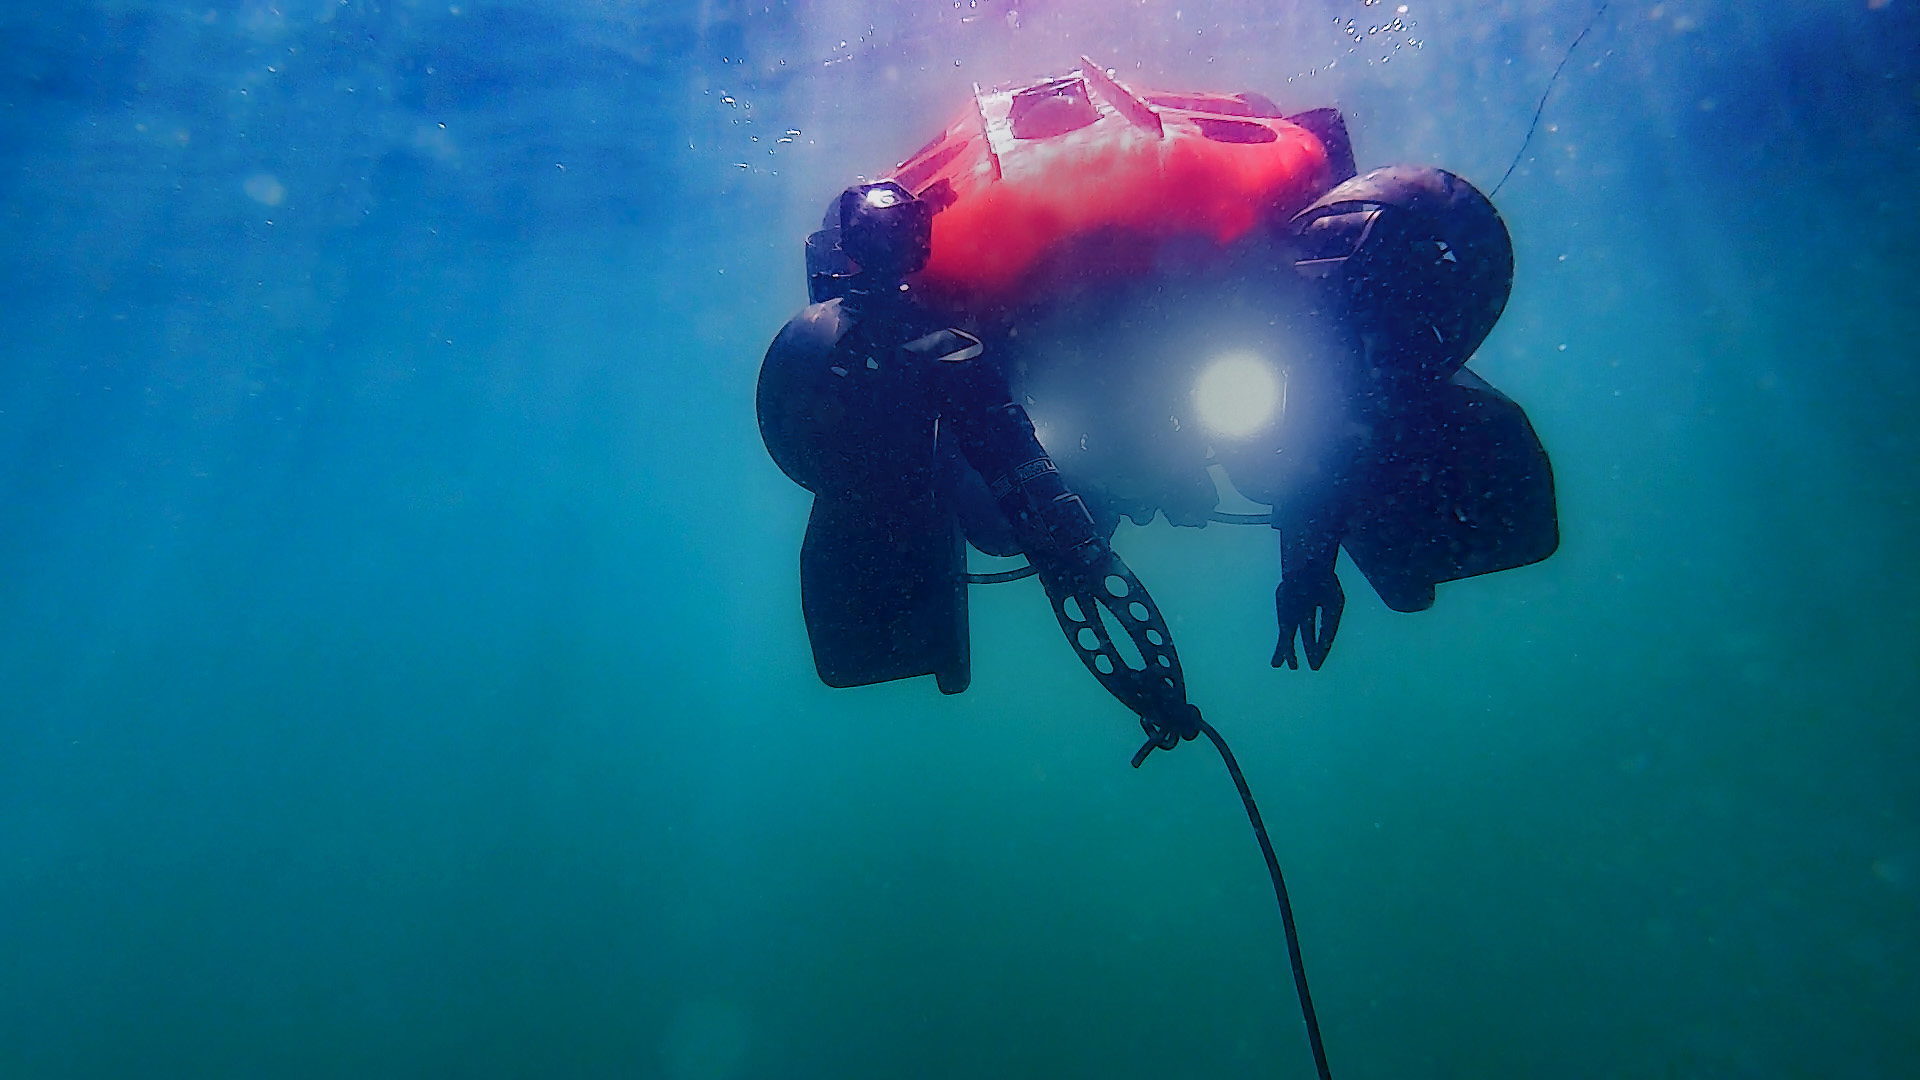 A test dive in Sydney Harbour 2021